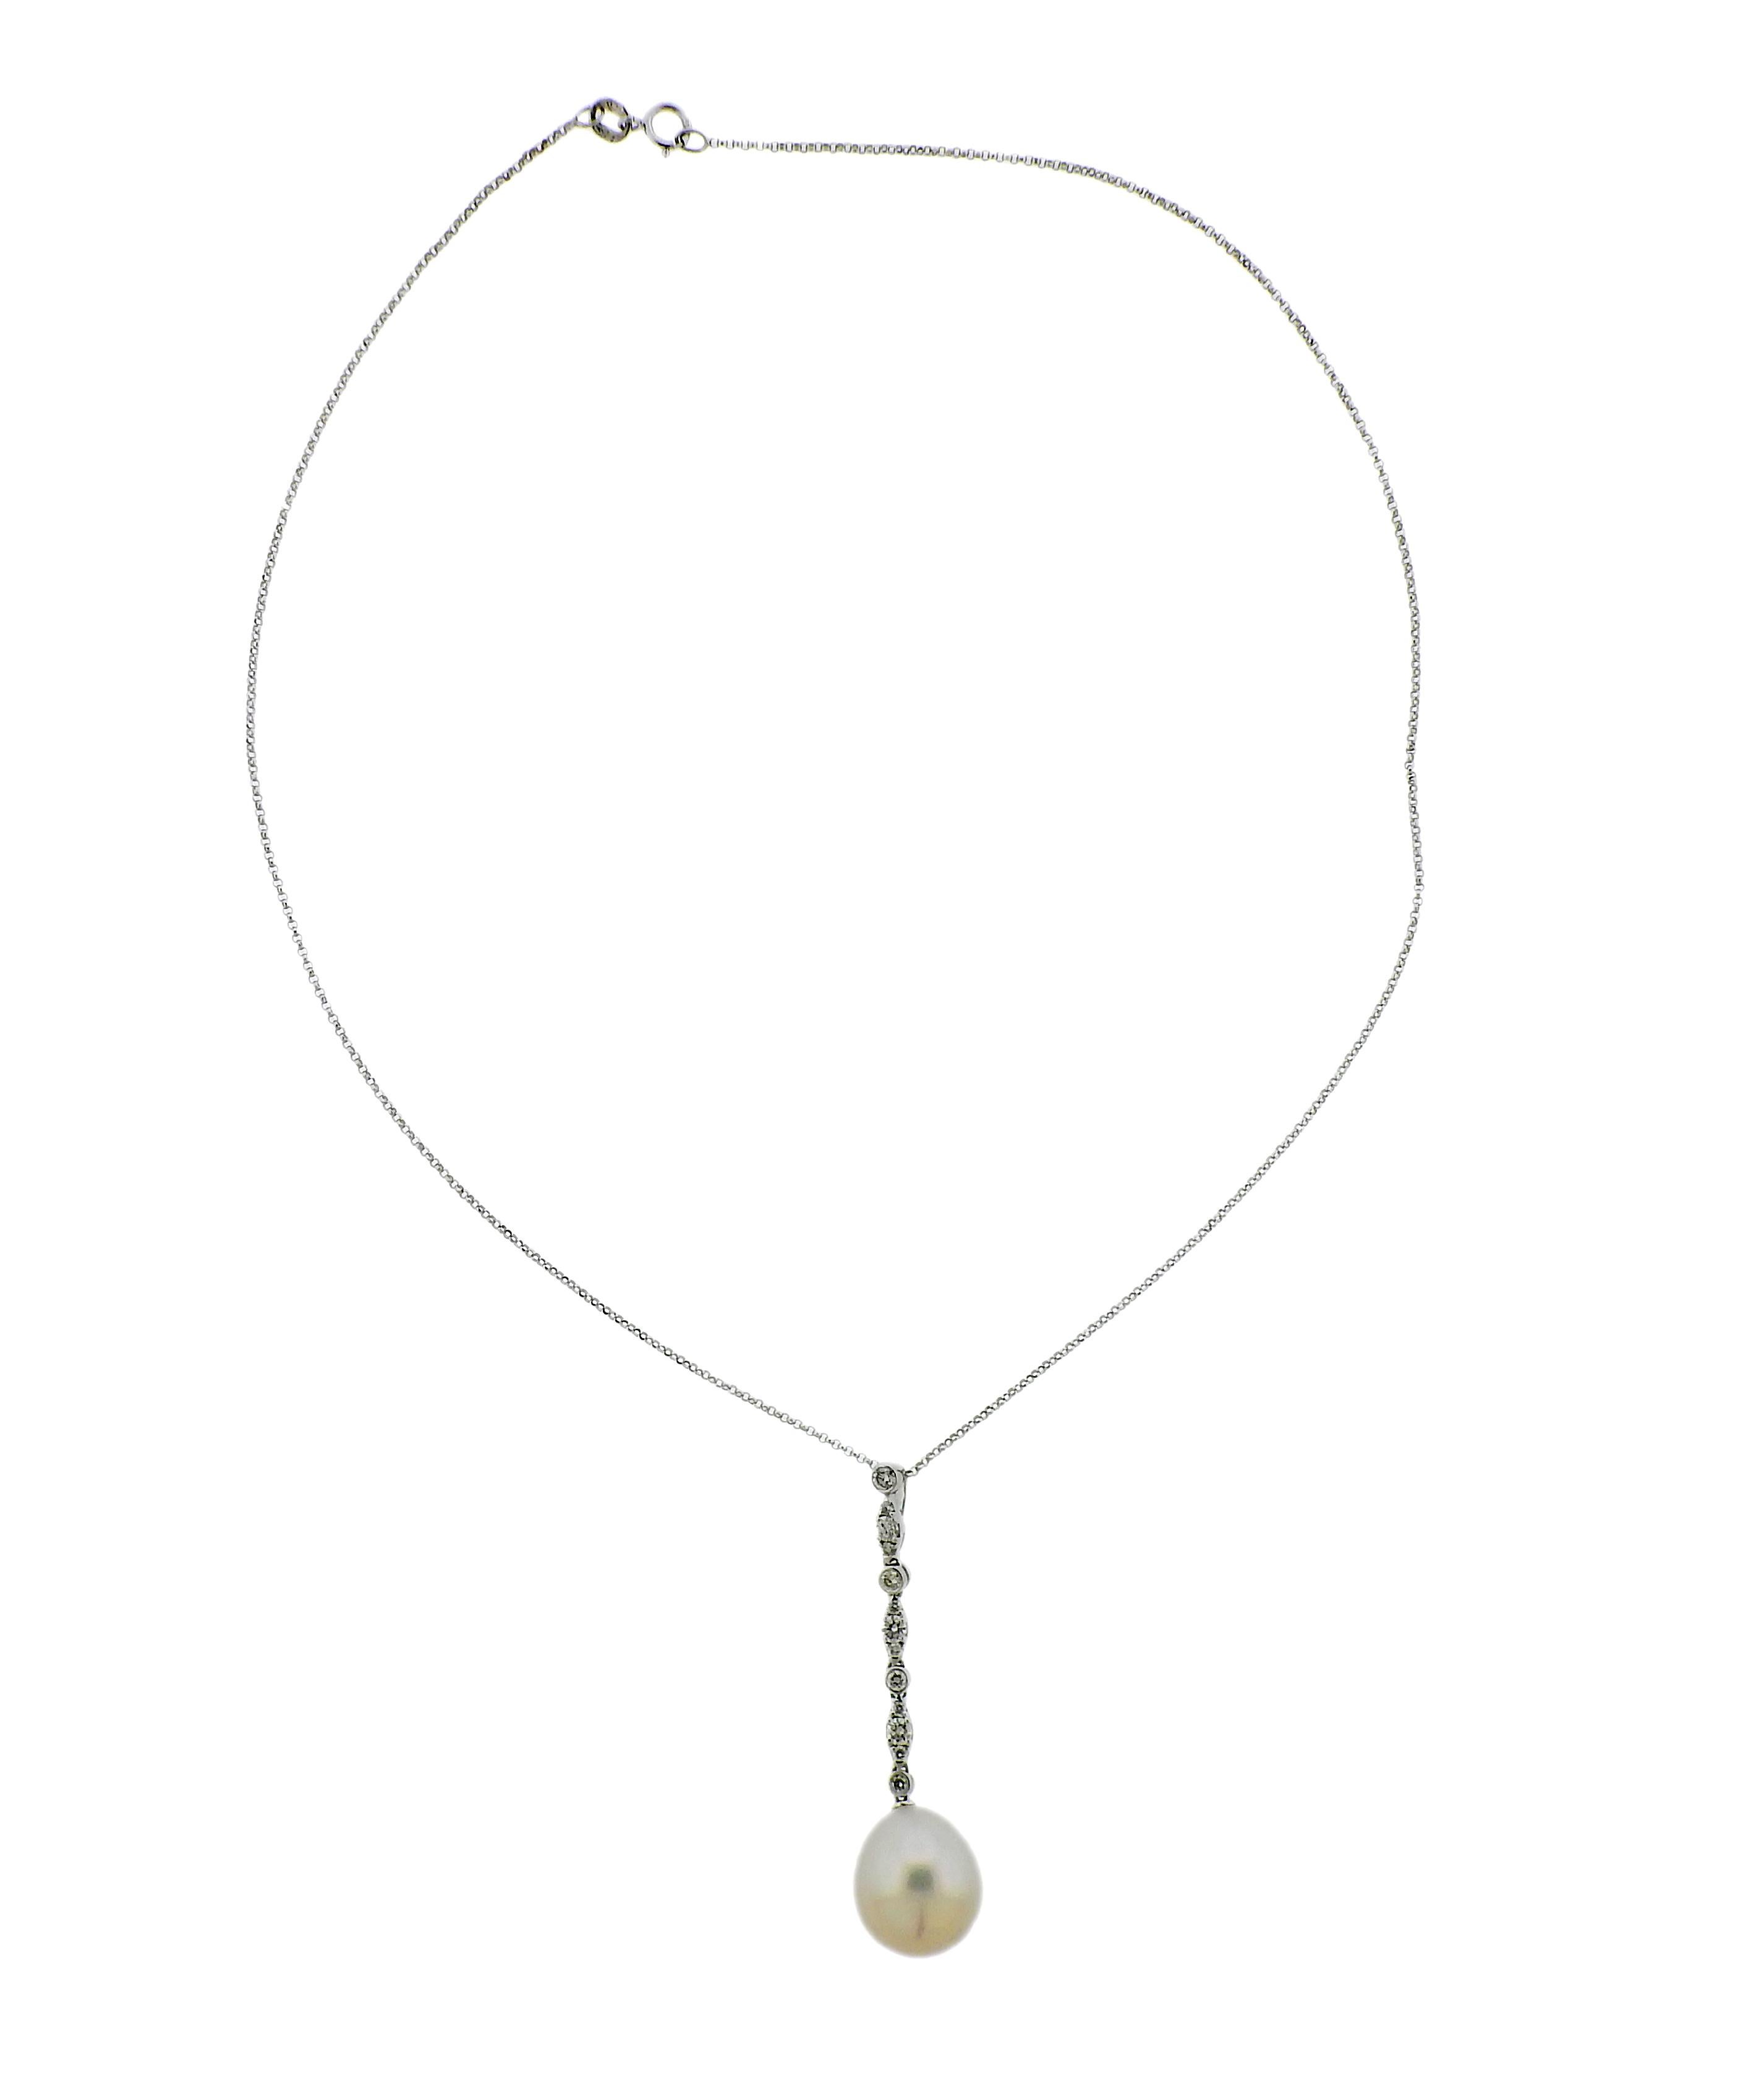 18k white gold South Sea Pearl Pendant necklace by Assael, set with approx 0.44ctw of VS G diamonds. Brand new without tags, comes with Assael pouch. Retail - $5600. Necklace is 16